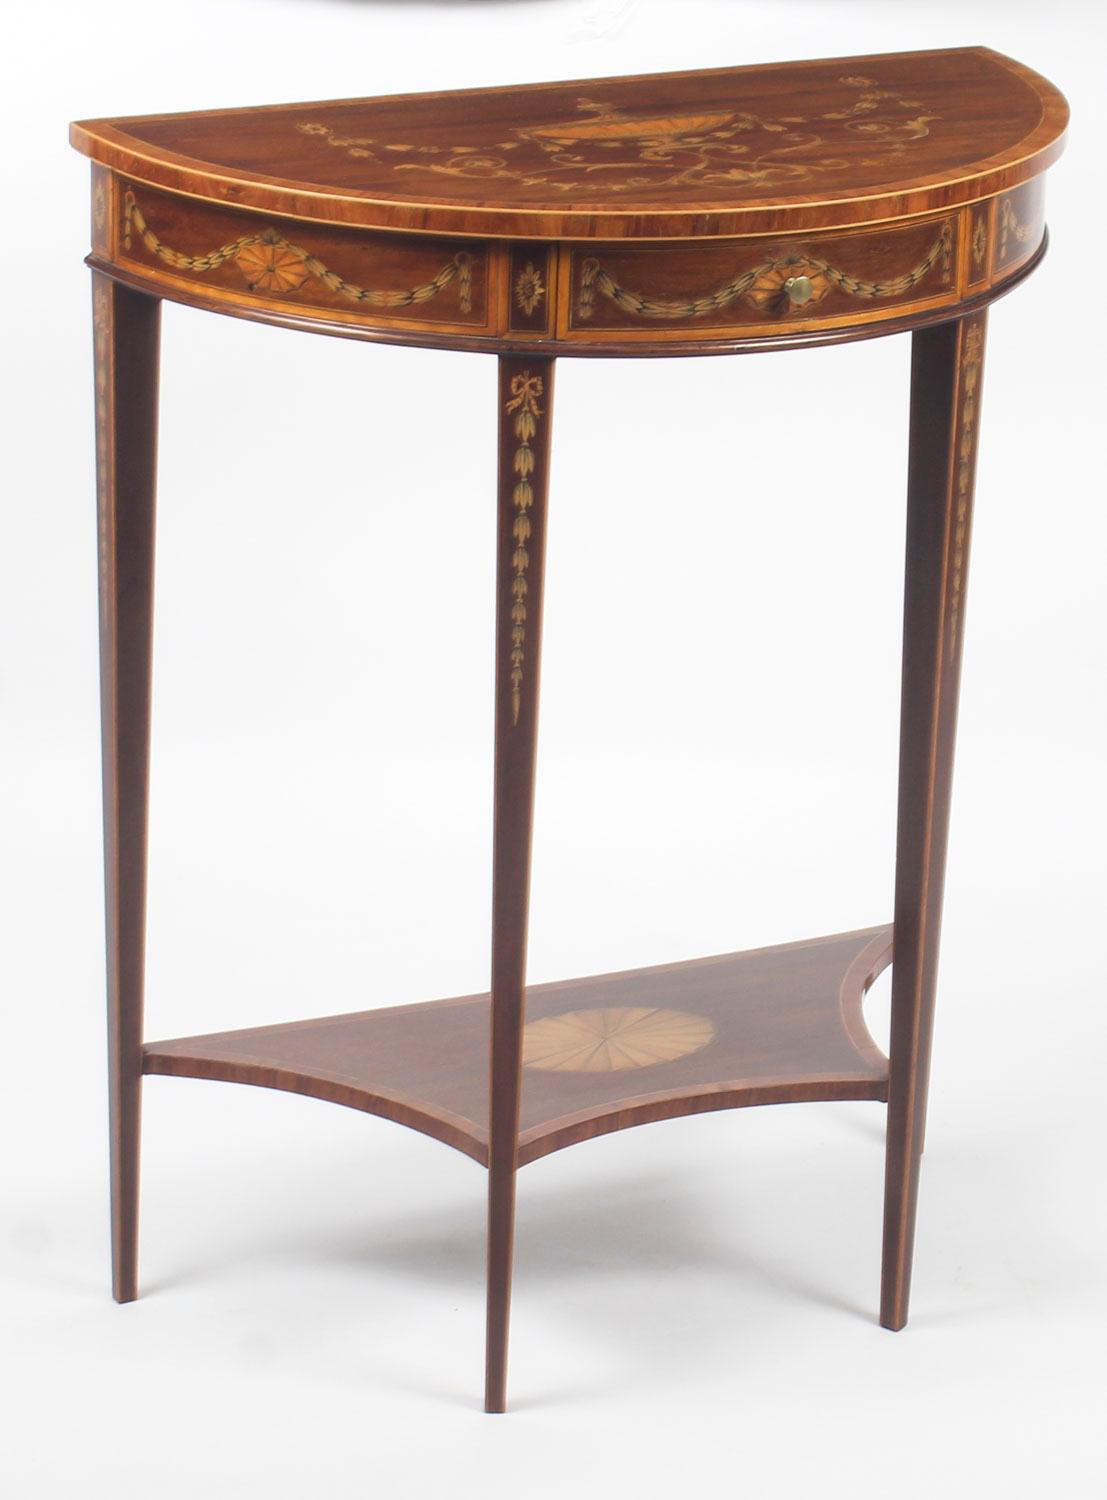 Antique Regency Revival Marquetry Console Table, 19th Century 6